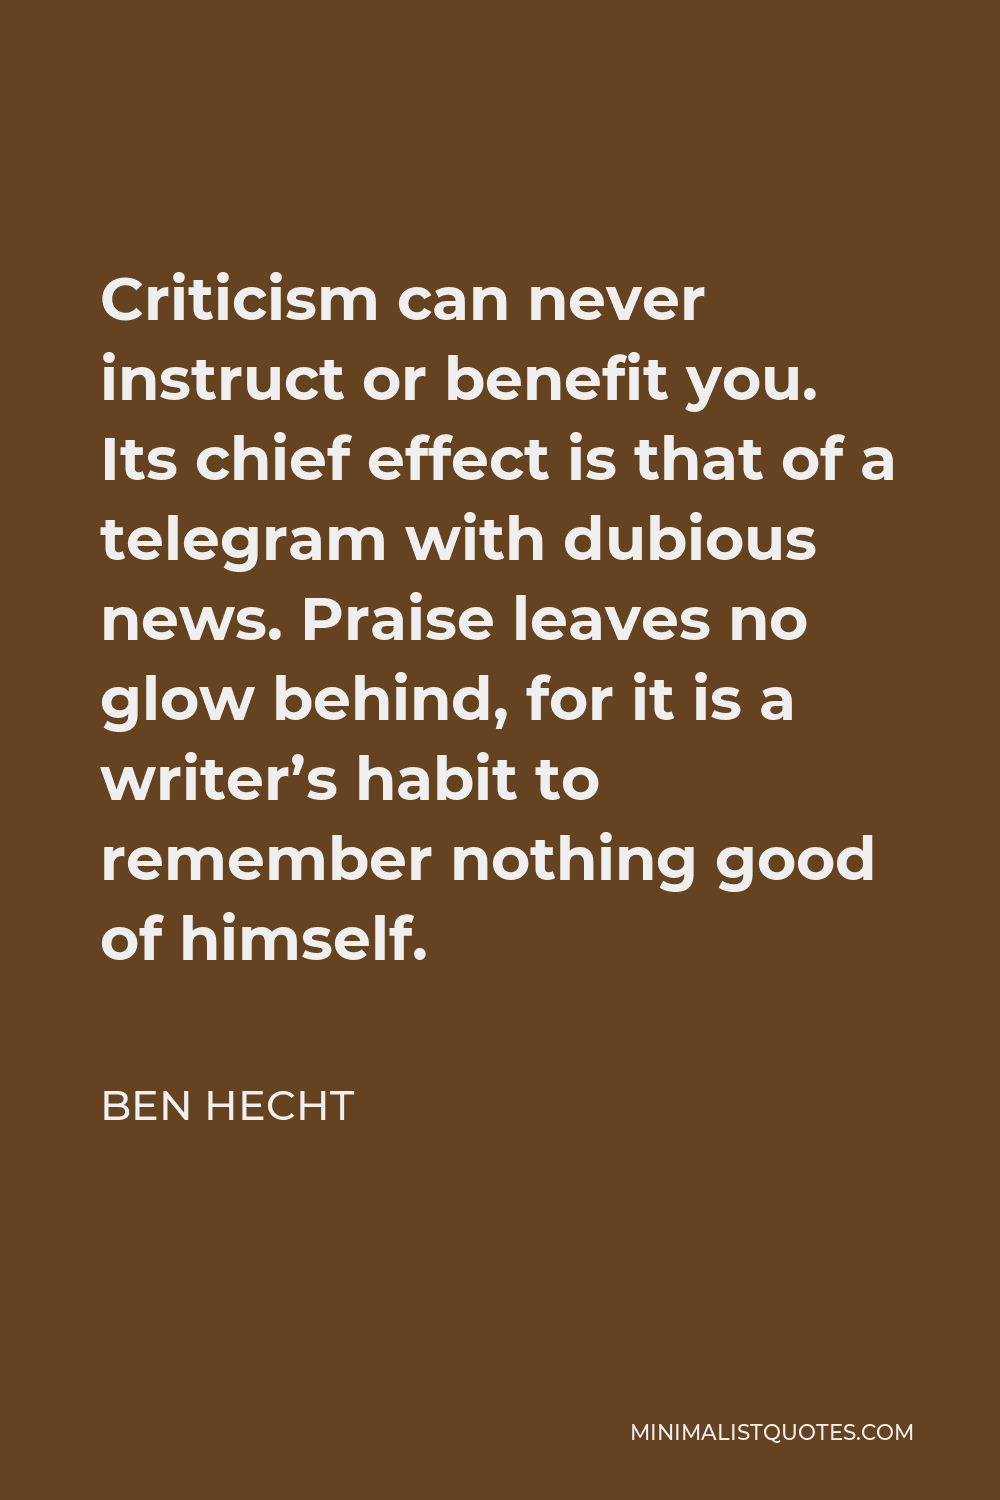 Ben Hecht Quote - Criticism can never instruct or benefit you. Its chief effect is that of a telegram with dubious news. Praise leaves no glow behind, for it is a writer’s habit to remember nothing good of himself.